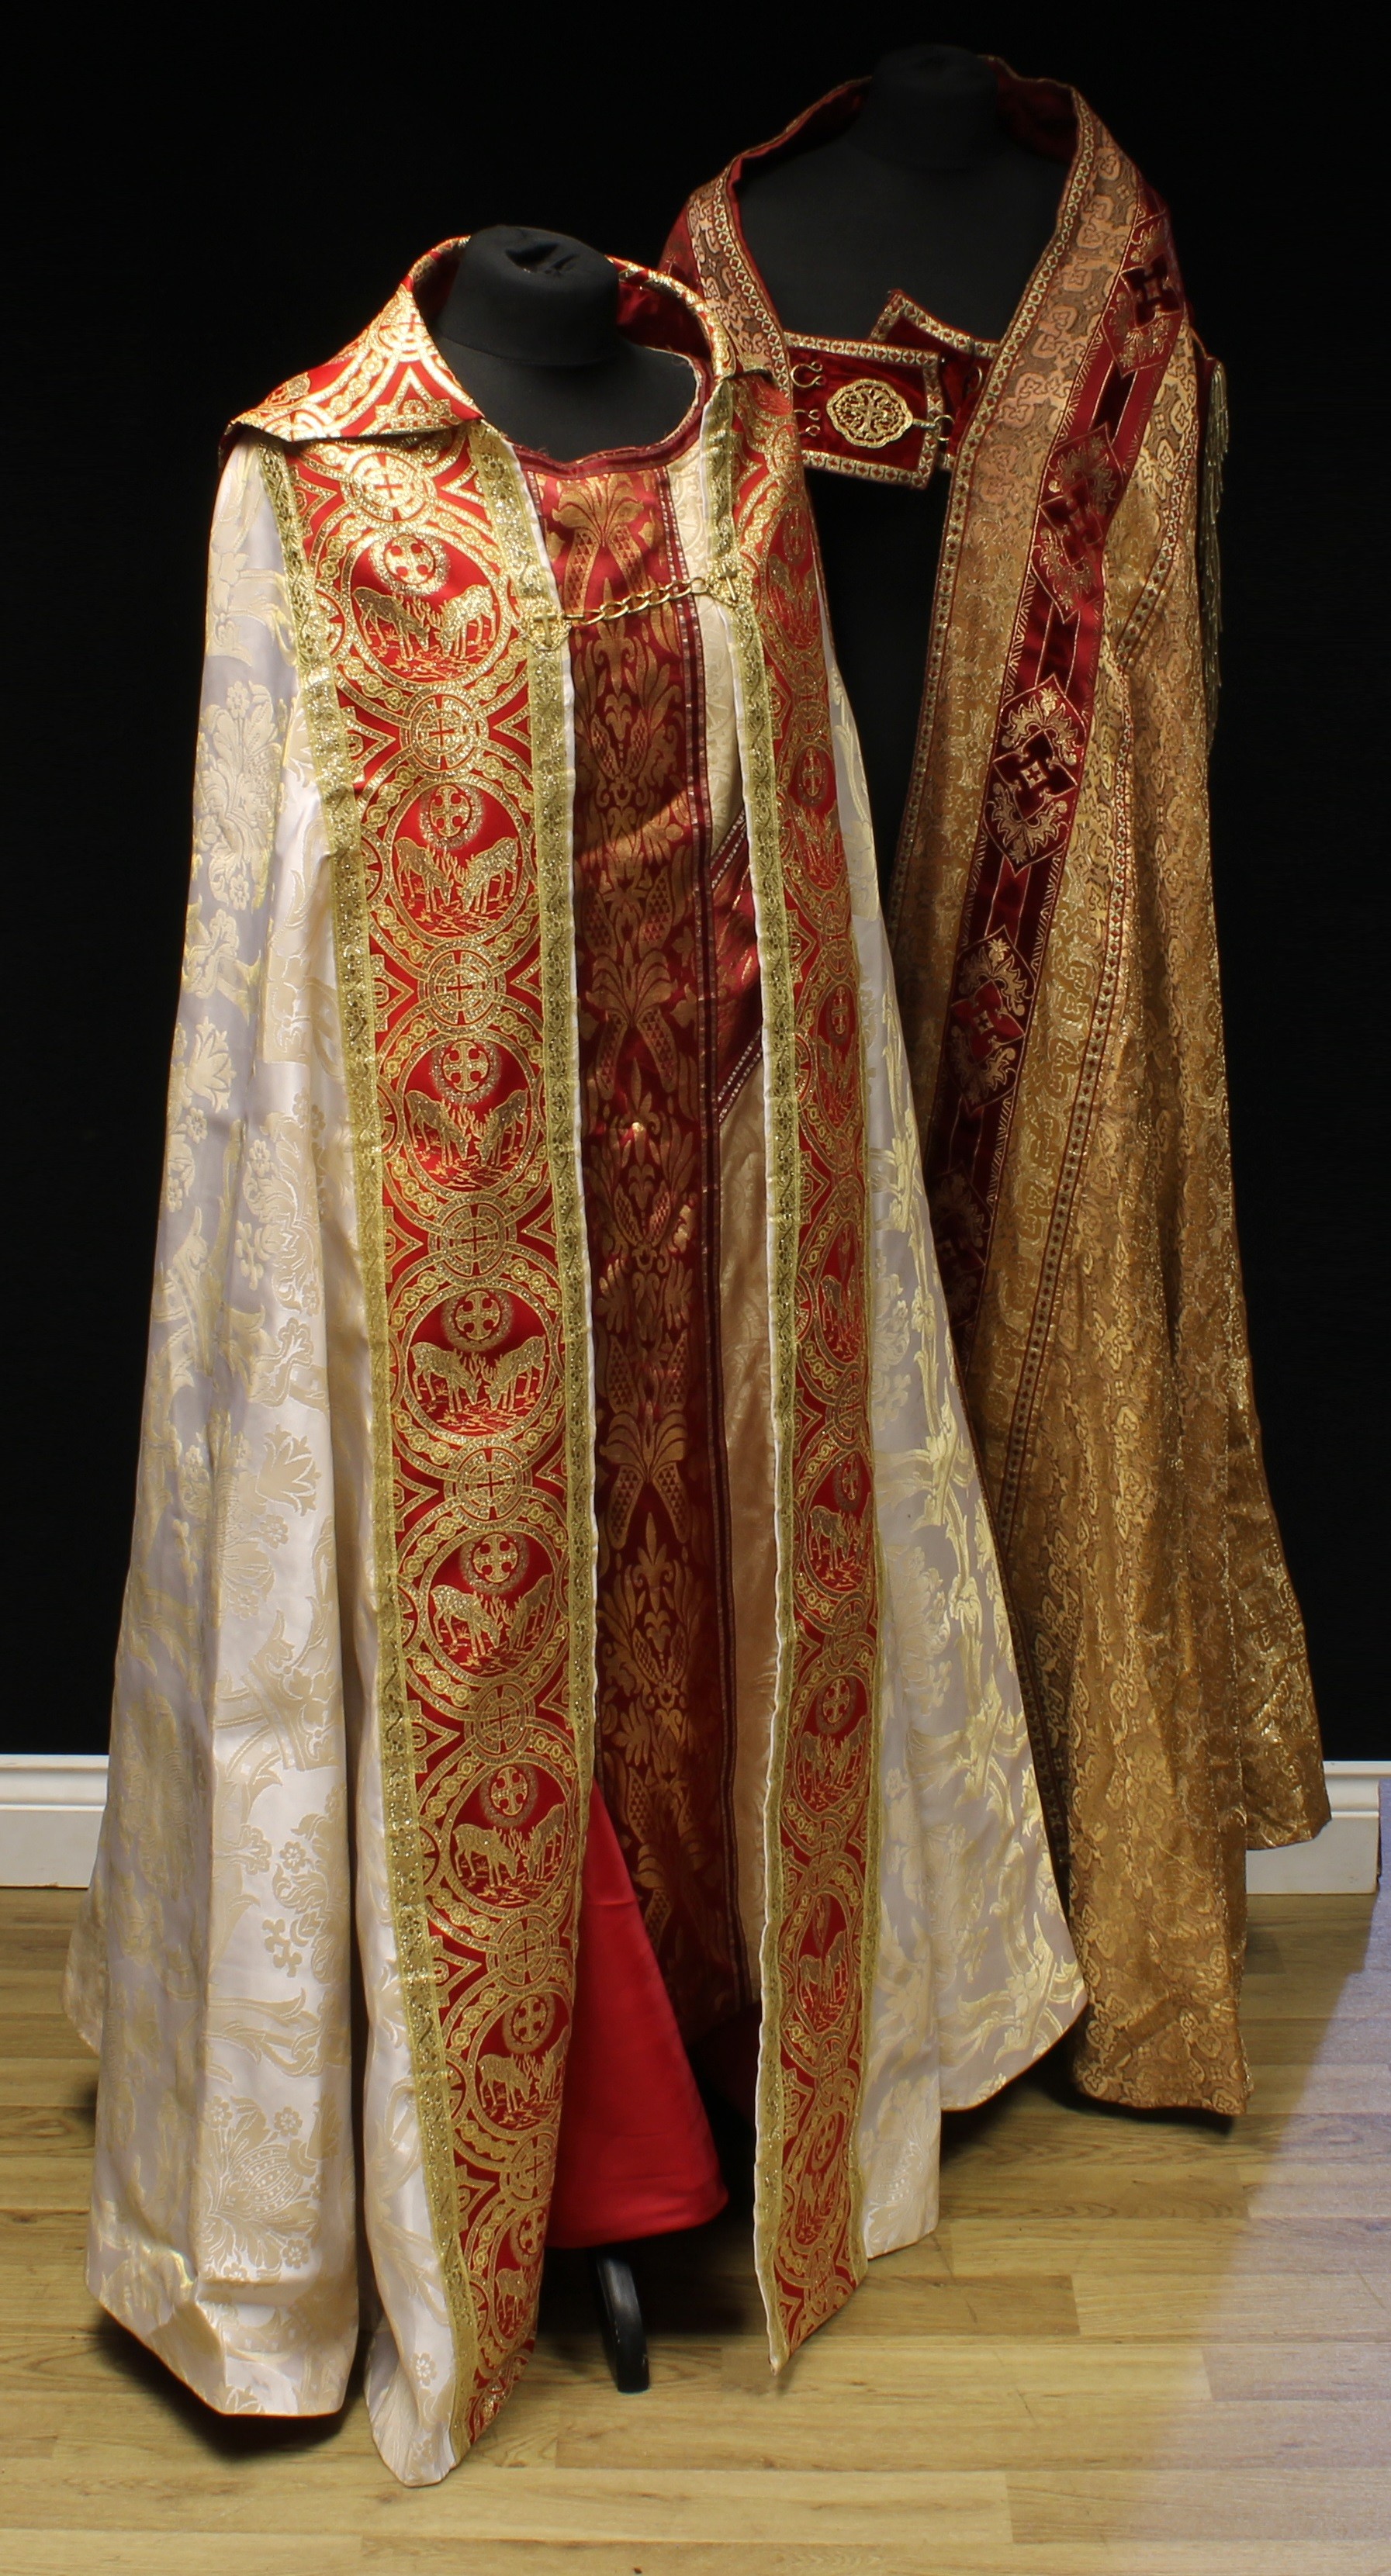 Ecclesiastical Liturgical Vestments - a cope, richly embroidered in gilt threads on red stain and